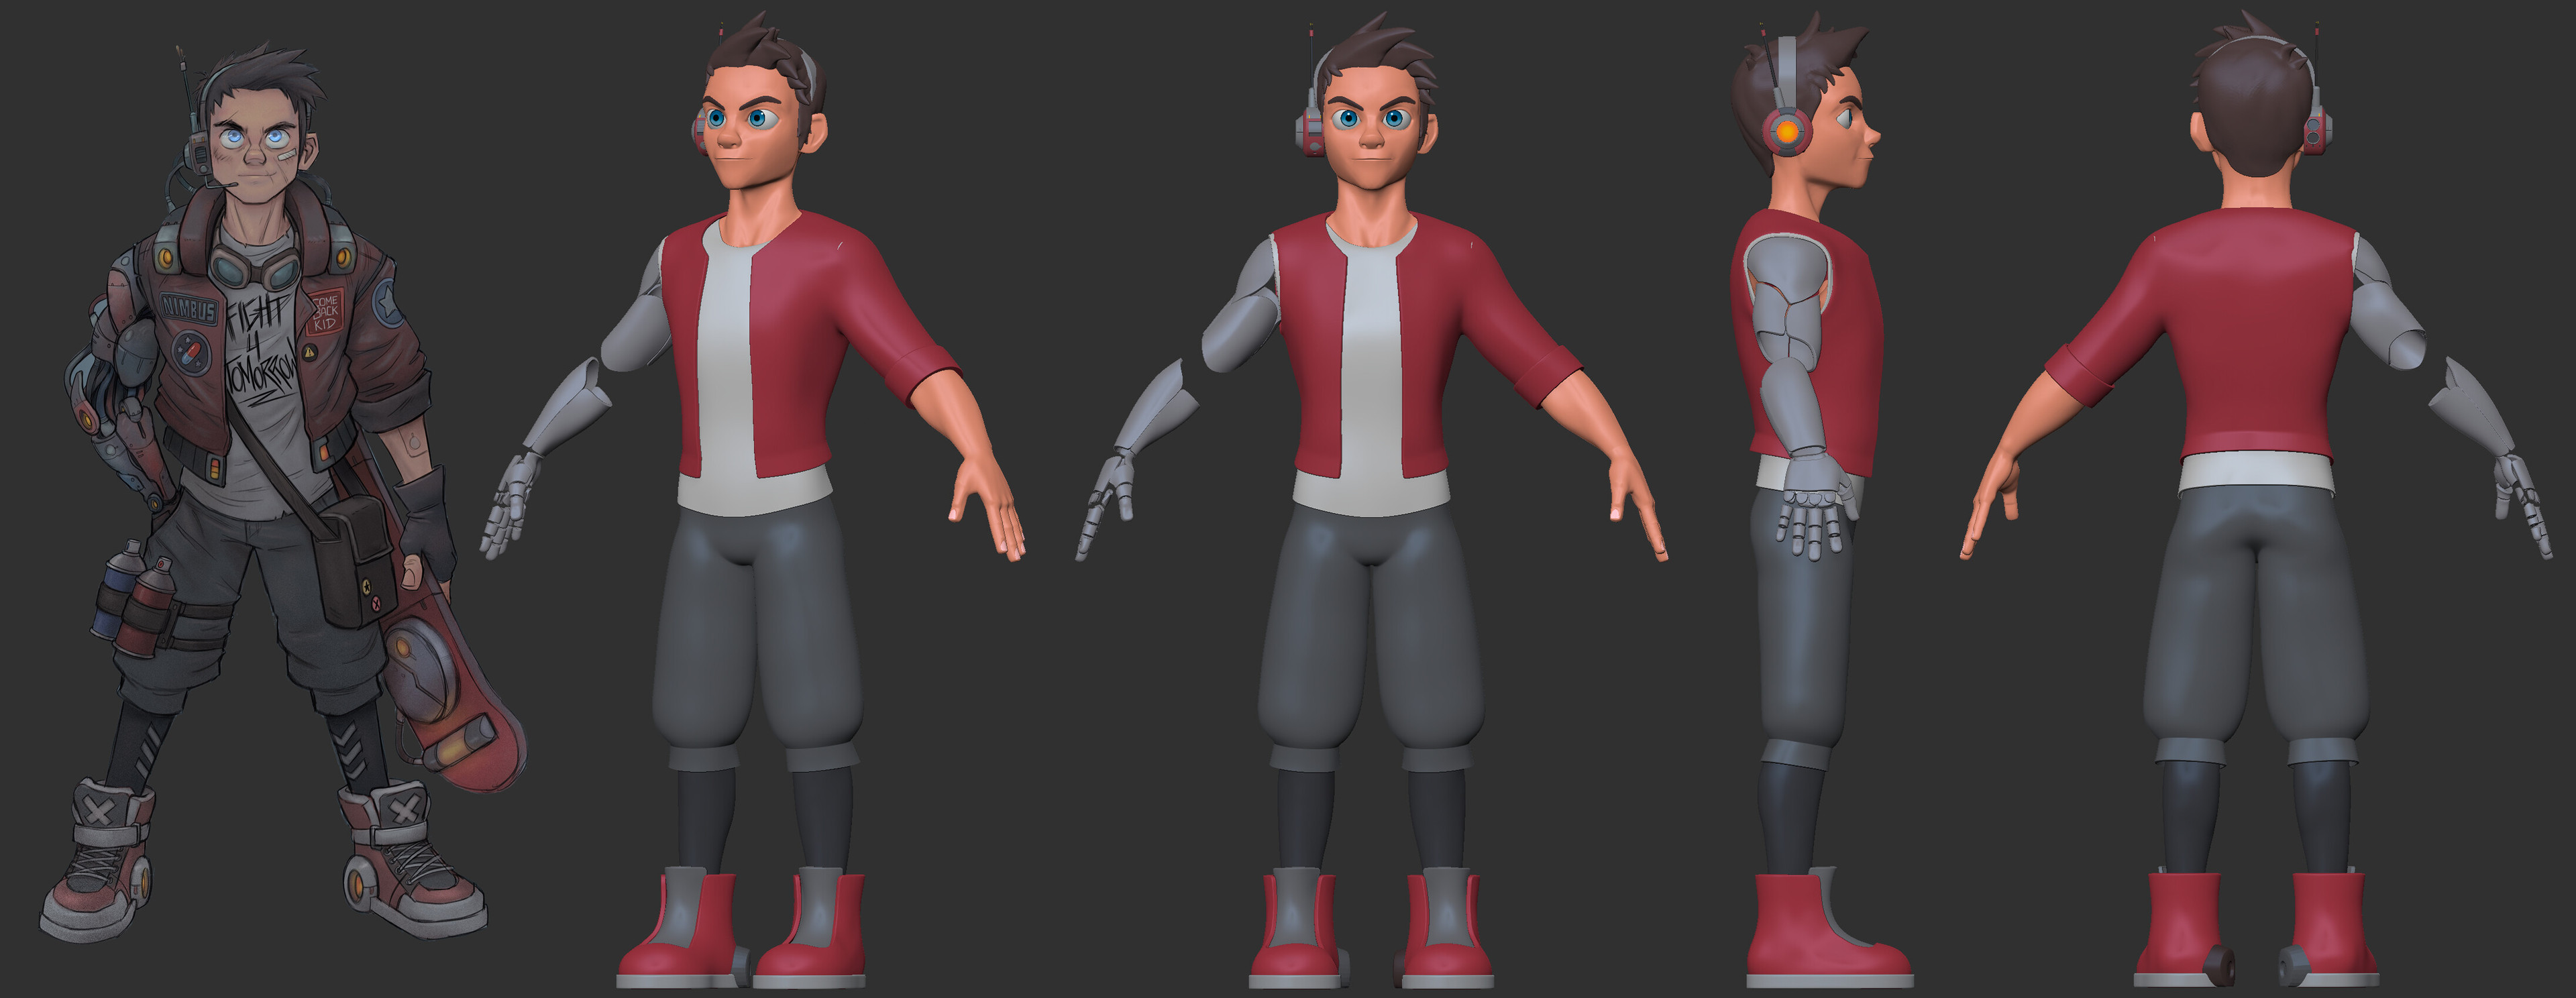 High resolution body and head with clothing blocked out. 